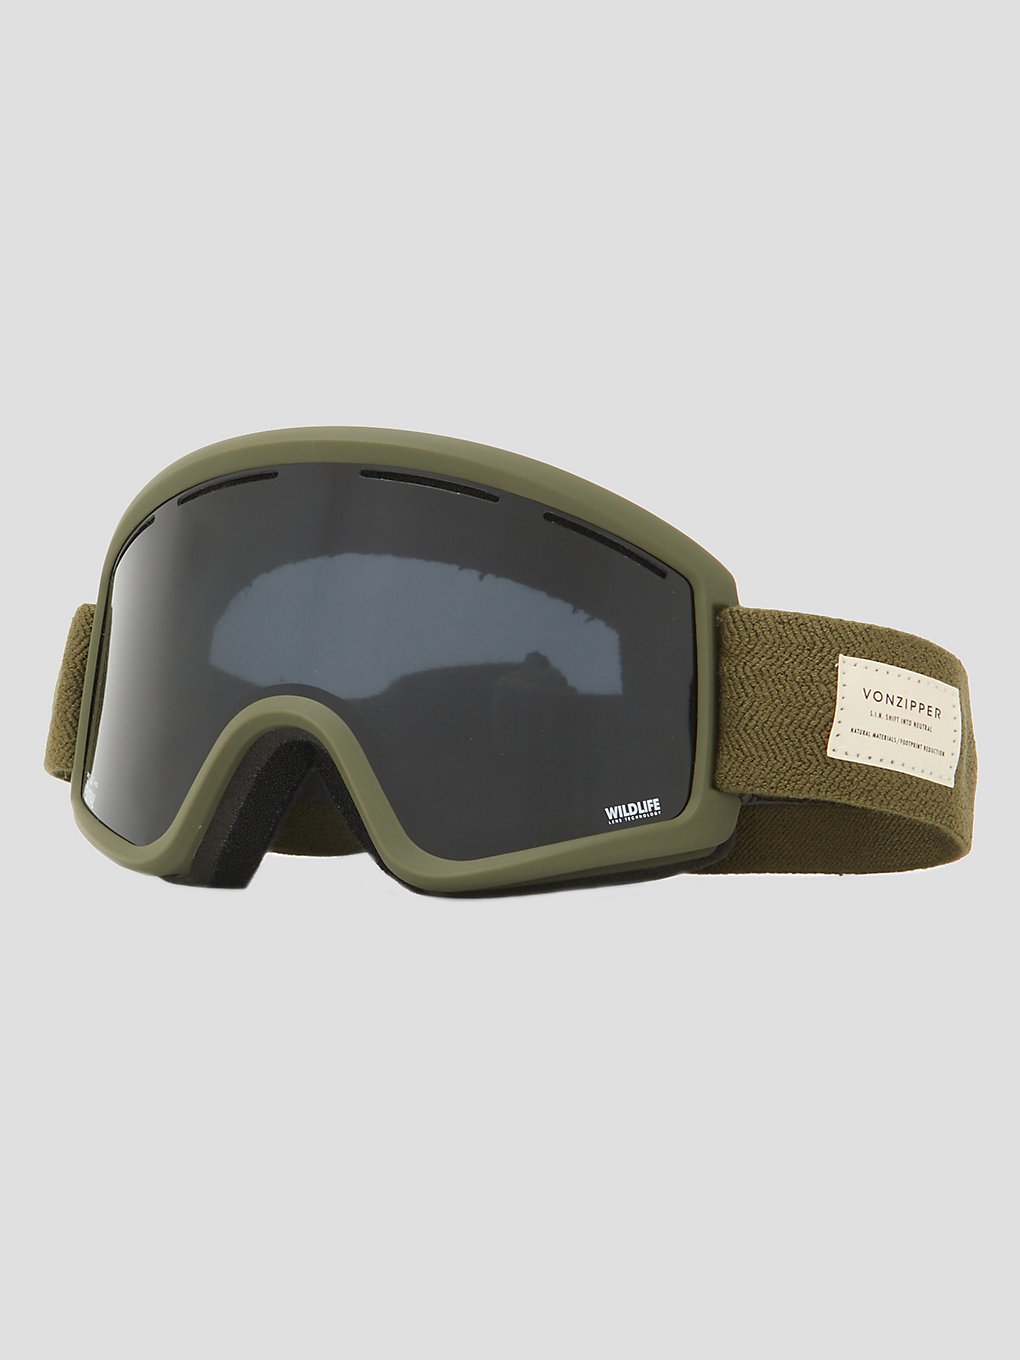 VonZipper Cleaver S.I.N. Charcoal Goggle black out kaufen